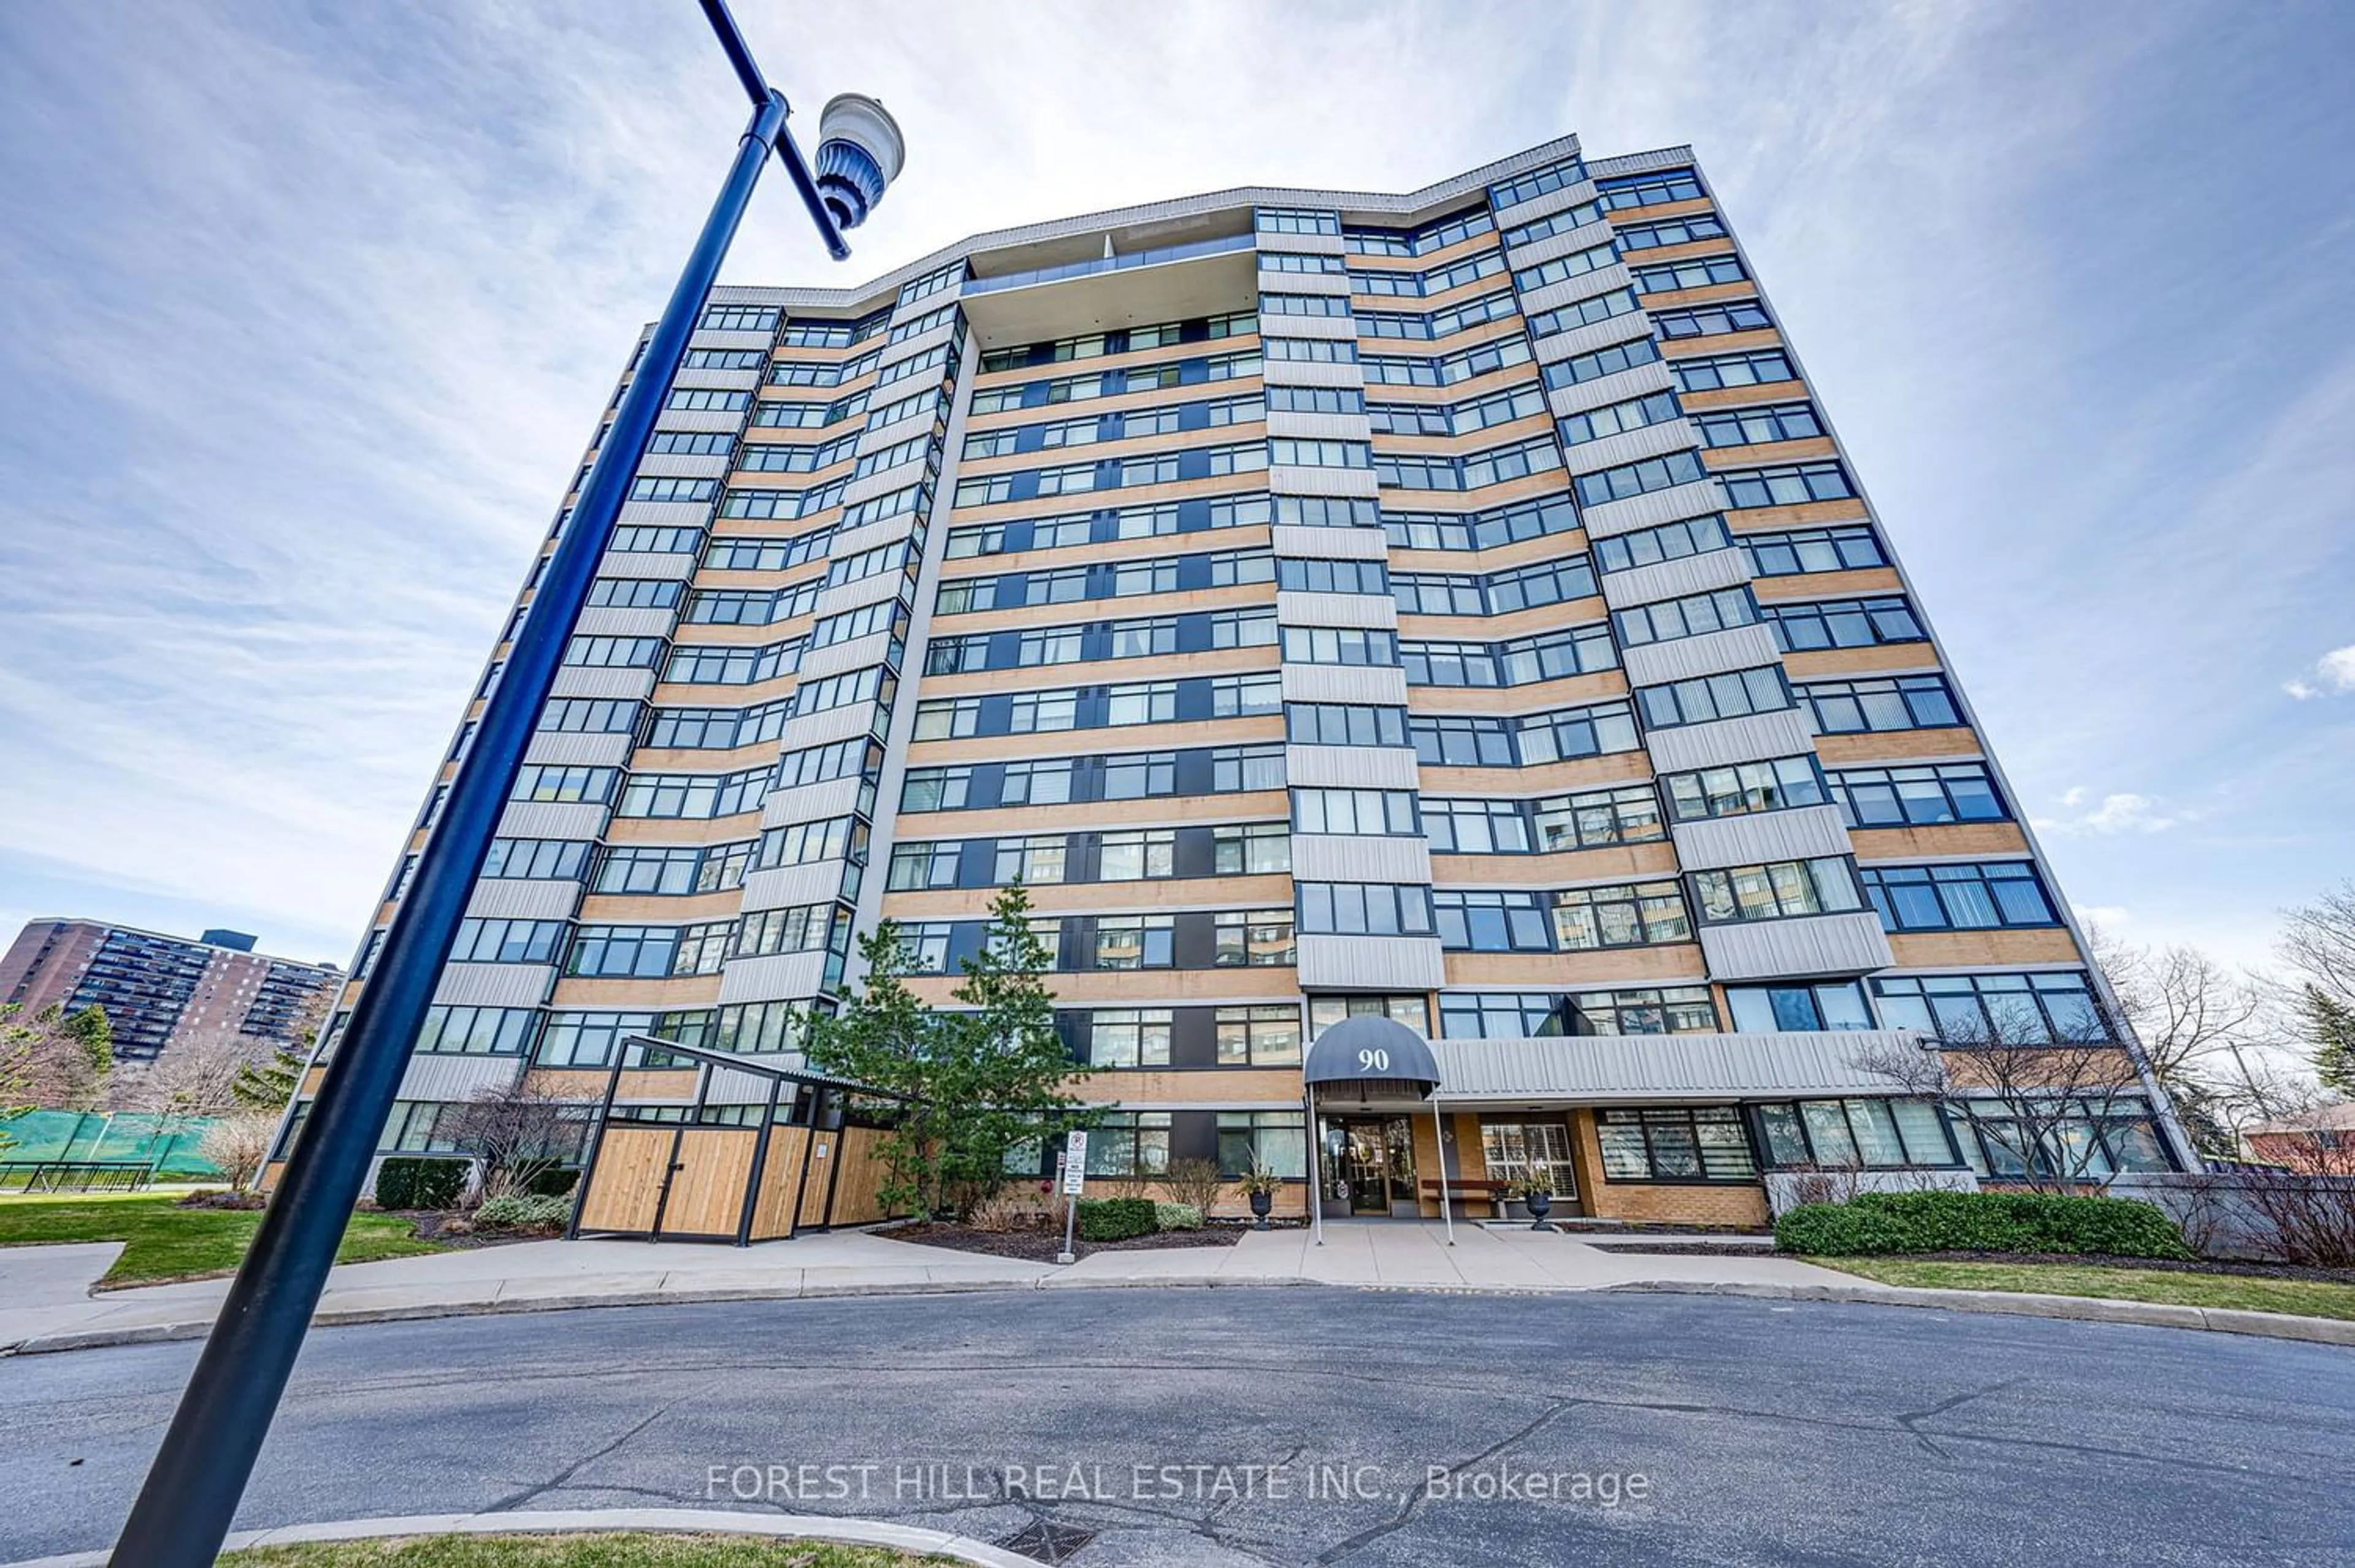 A pic from exterior of the house or condo for 90 Fisherville Rd #707, Toronto Ontario M2R 3J9